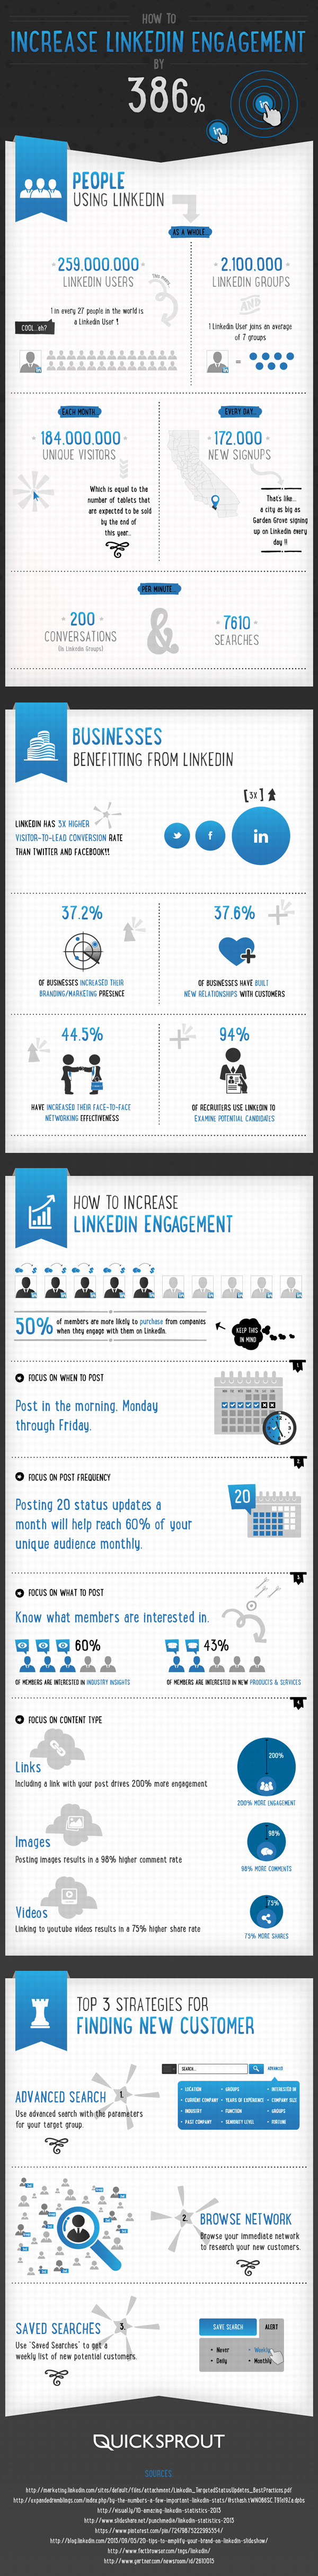 LinkedIn is a very misunderstood platform. Use these tips and tricks to greatly increase the engagement with your fellow LinkedIn members